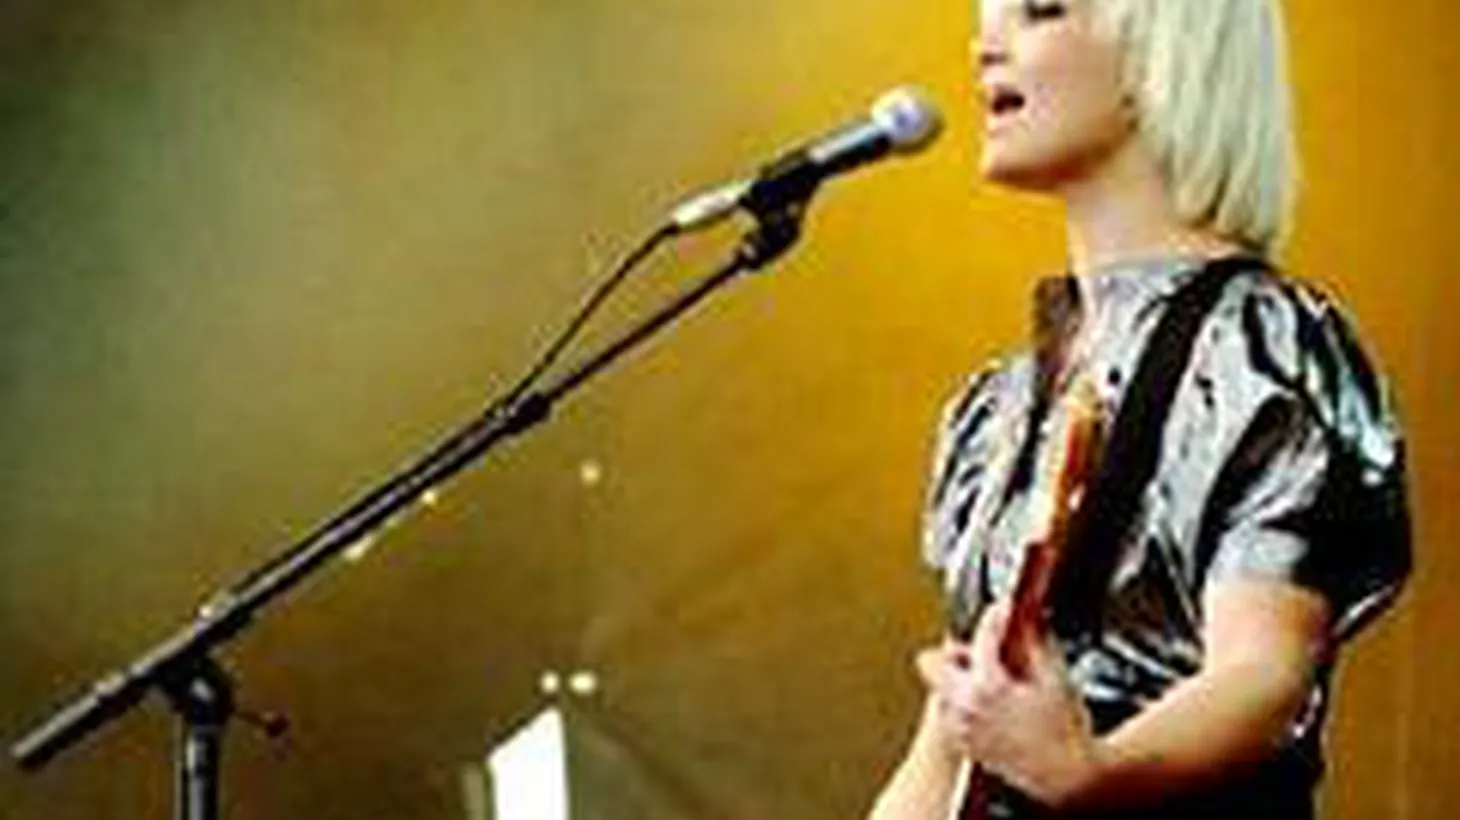 The Danish duo known as The Raveonettes bring a dramatic flair when they perform on  Morning Becomes Eclectic at 11:15am.
 
  Open in Google Docs Viewer  Open link in new tab  Open link in new window  Open link in new incognito window    Download file  Copy link address  Edit PDF File on PDFescape.com